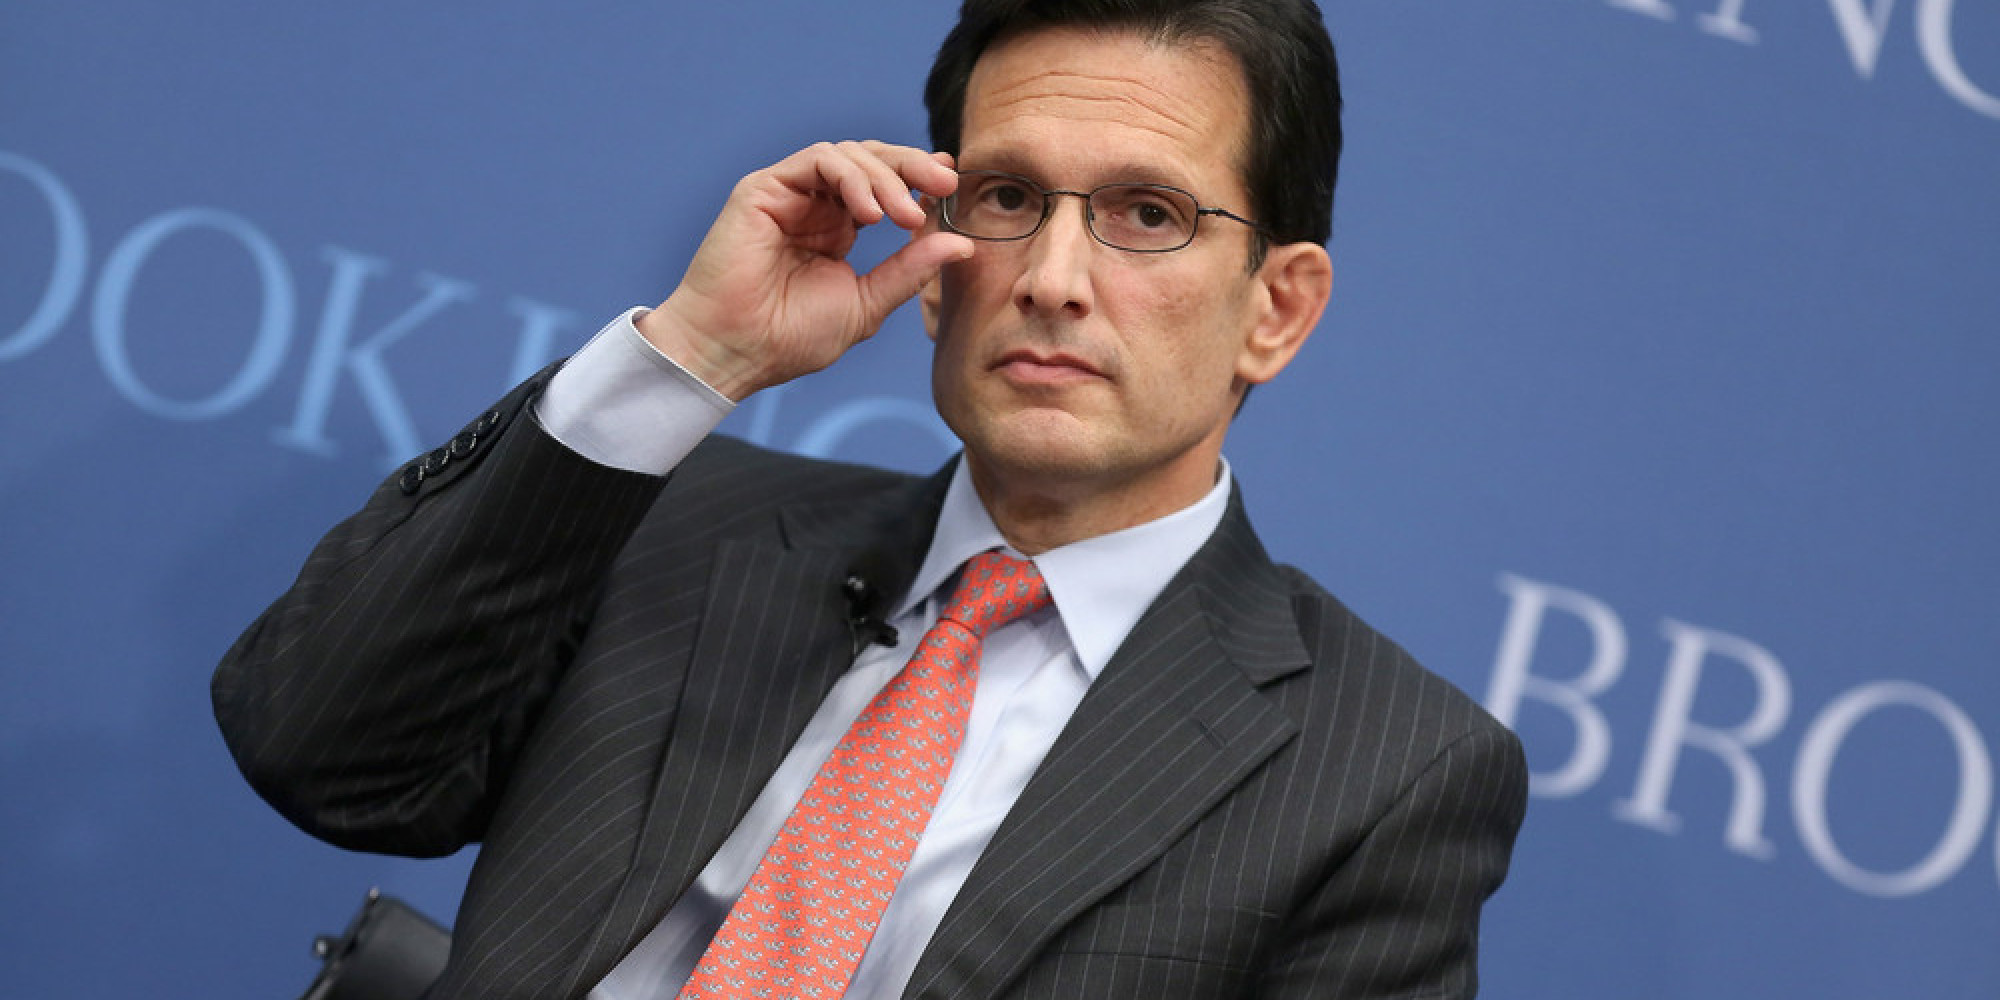 HQ Eric Cantor Wallpapers | File 293.42Kb